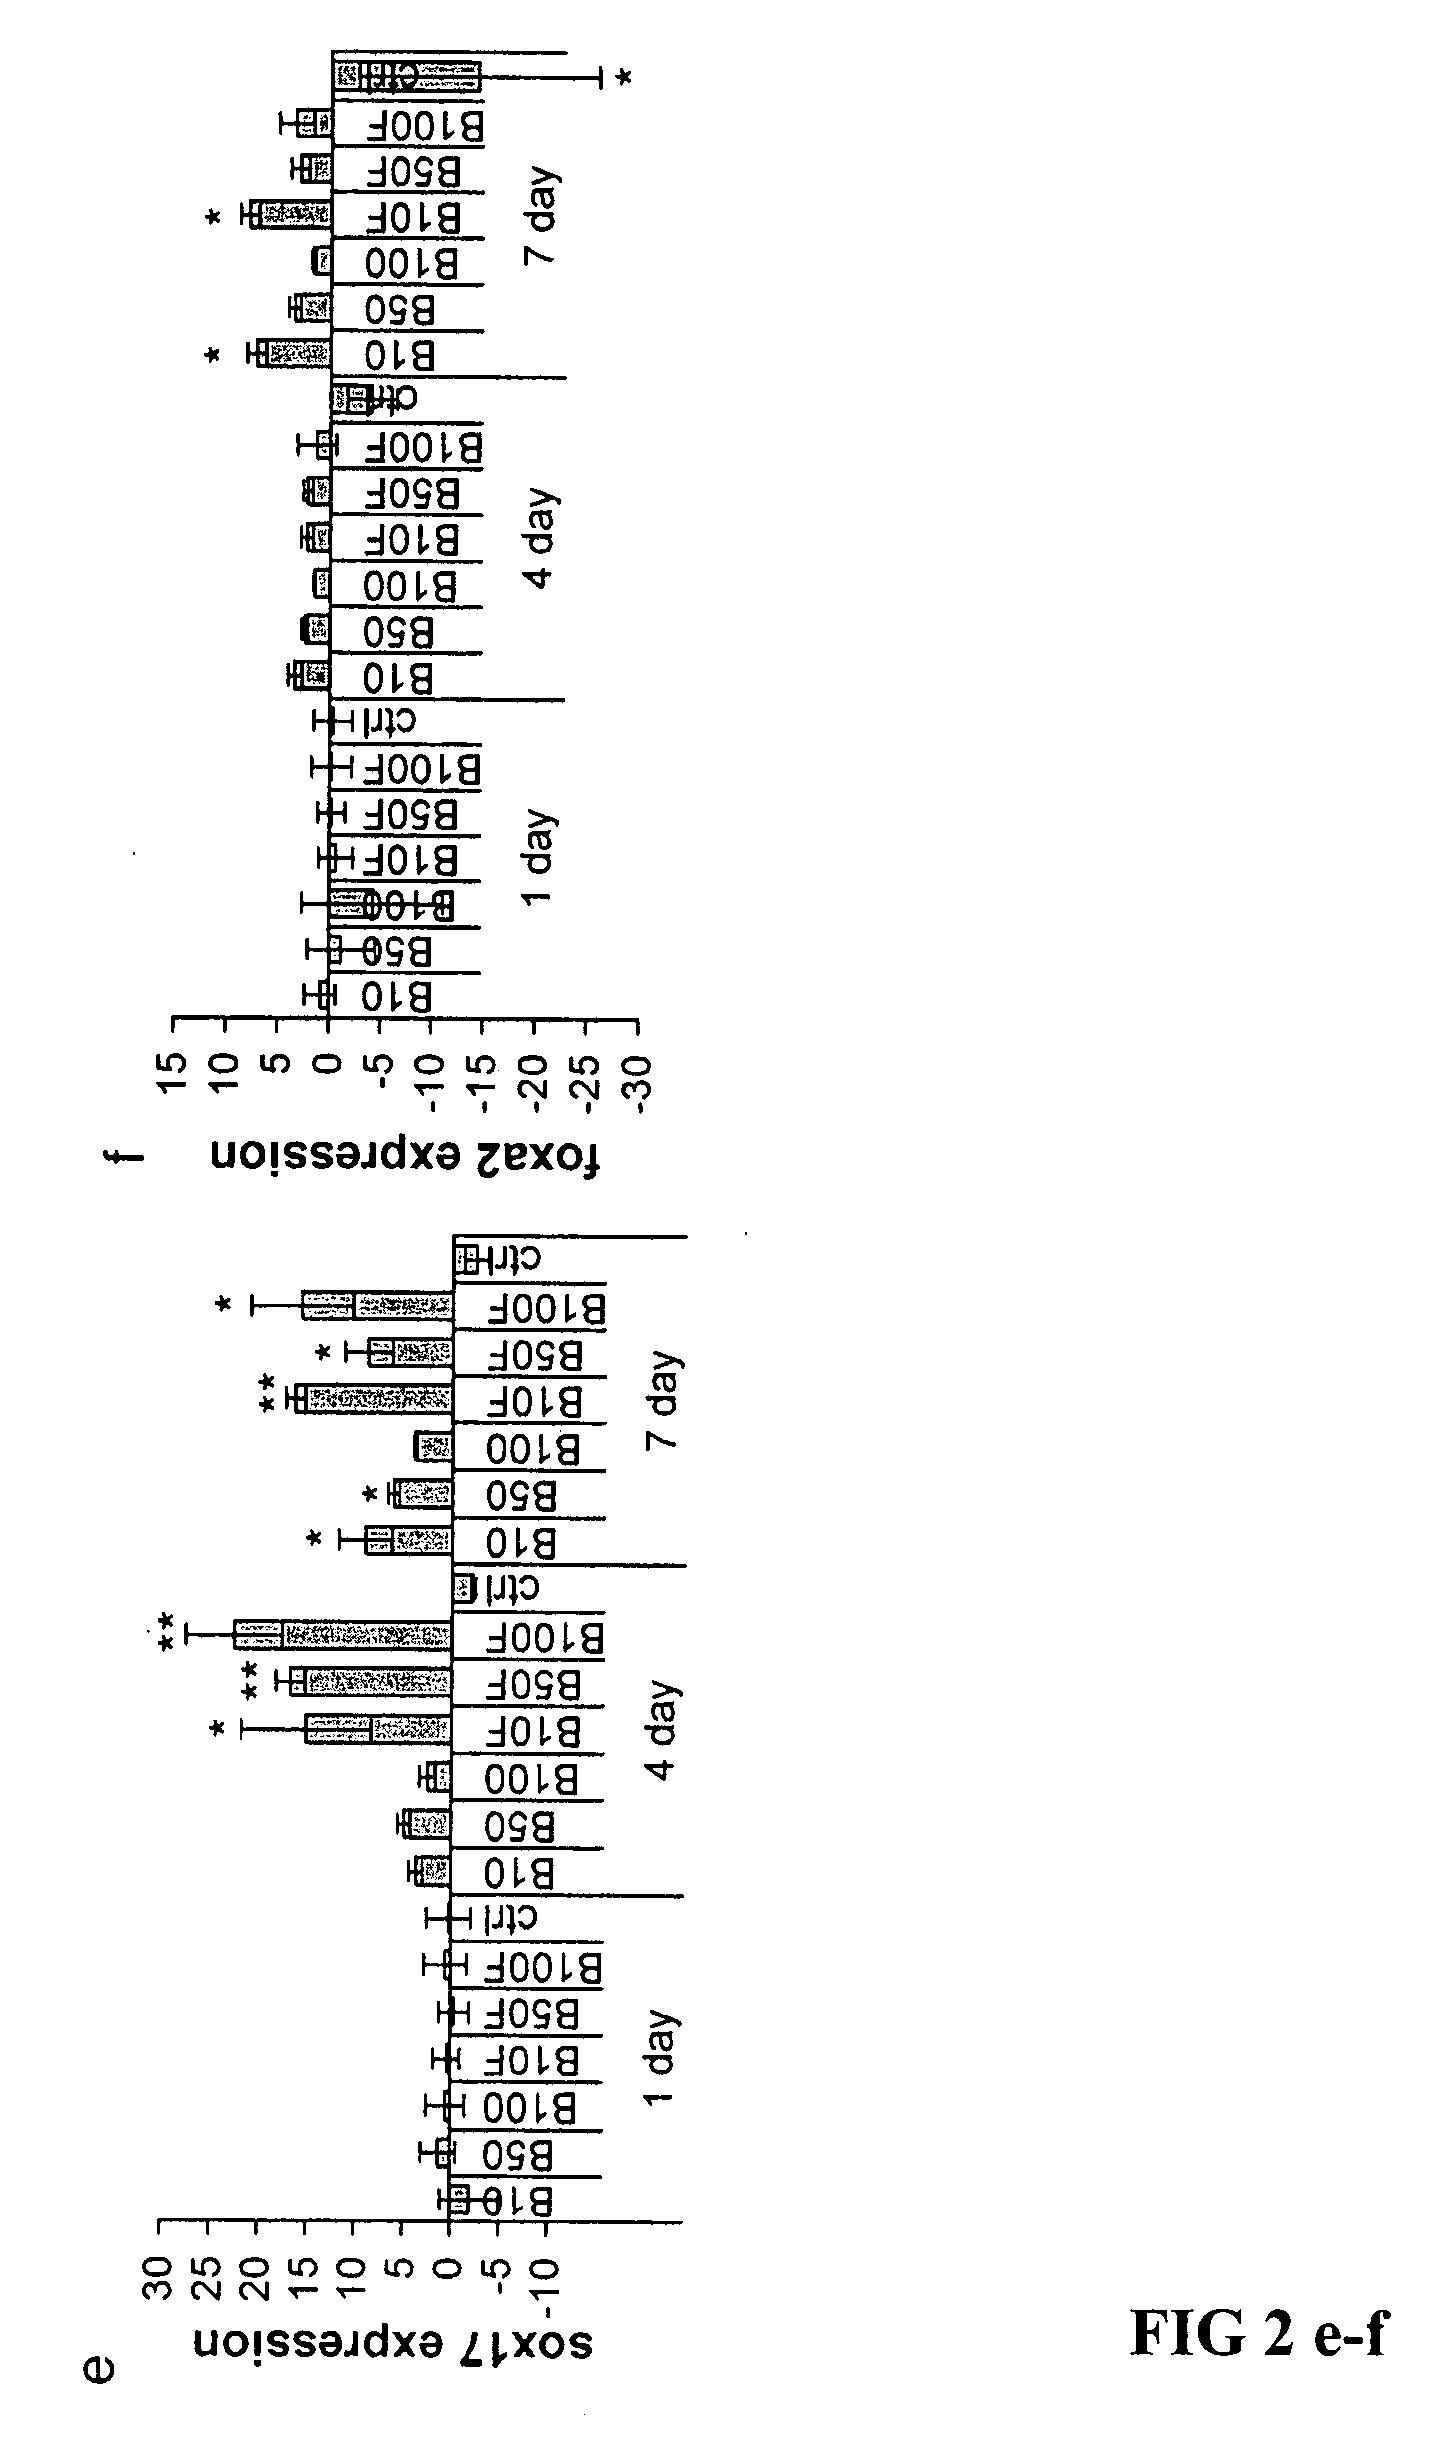 Method of differentiating stem cells into cells of the endoderm and pancreatic lineage